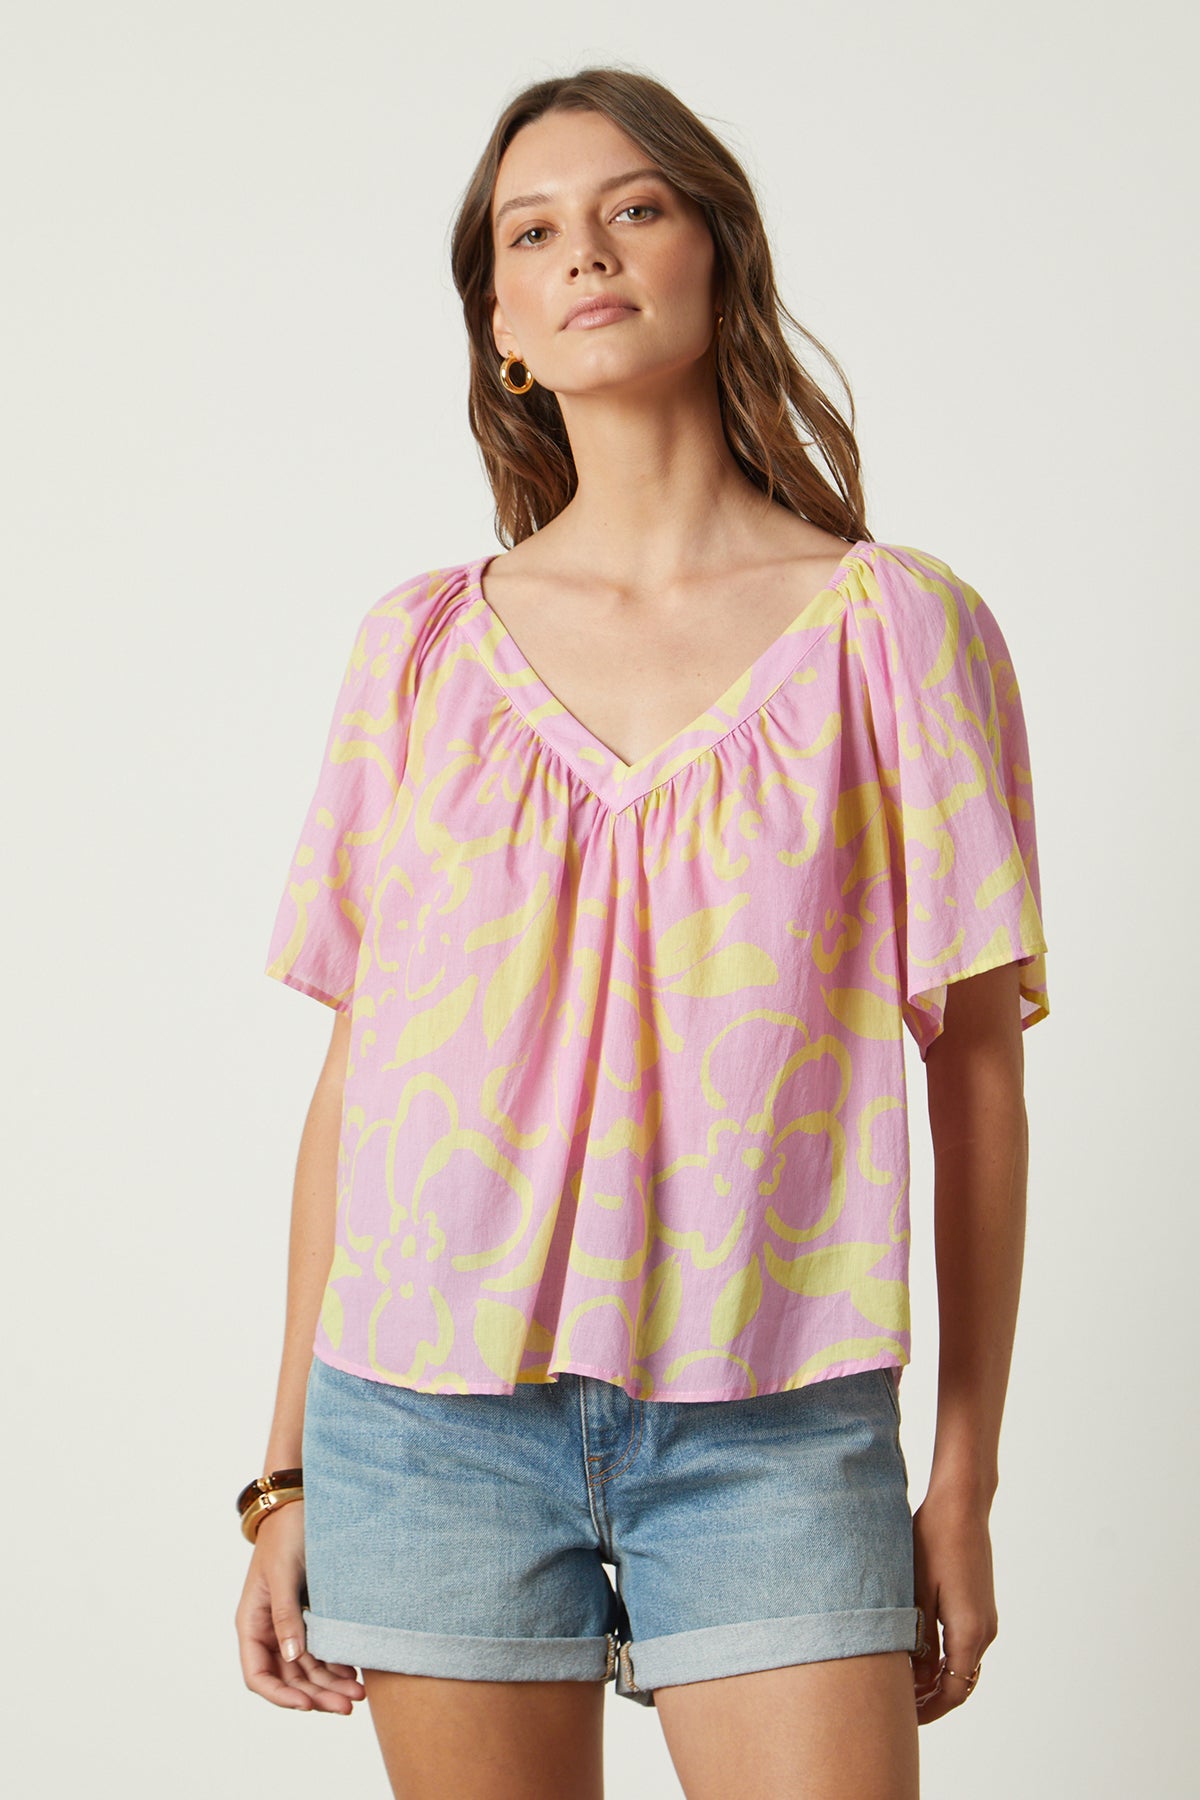   Liliana Top in print with pink and yellow front 